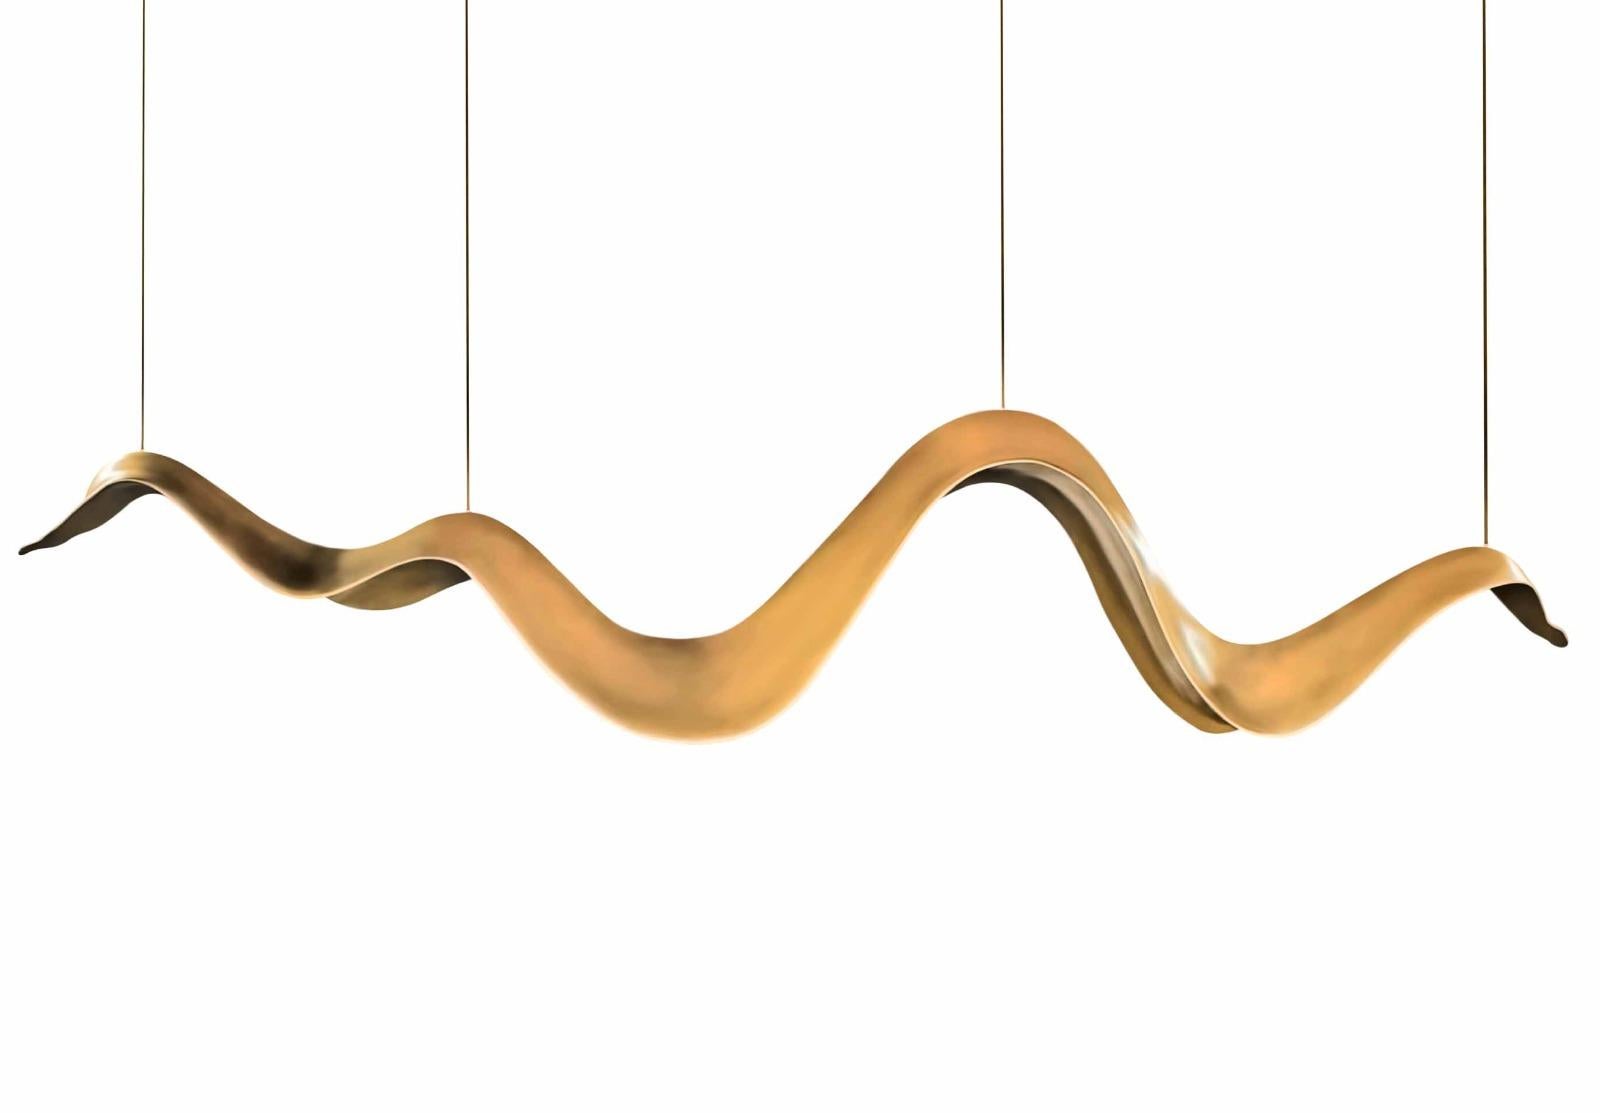 Suspension lamp

General information
Dimensions (cm): 285 x 36 x 60
Dimensions (in): 112.2 x 14.2 x 23.6
Weight (kg): 17
Weight (lbs): 37.5

Materials and colors
Structure: Resin reinforced with fiberglass finished in pale gold color;
Lighting: 4